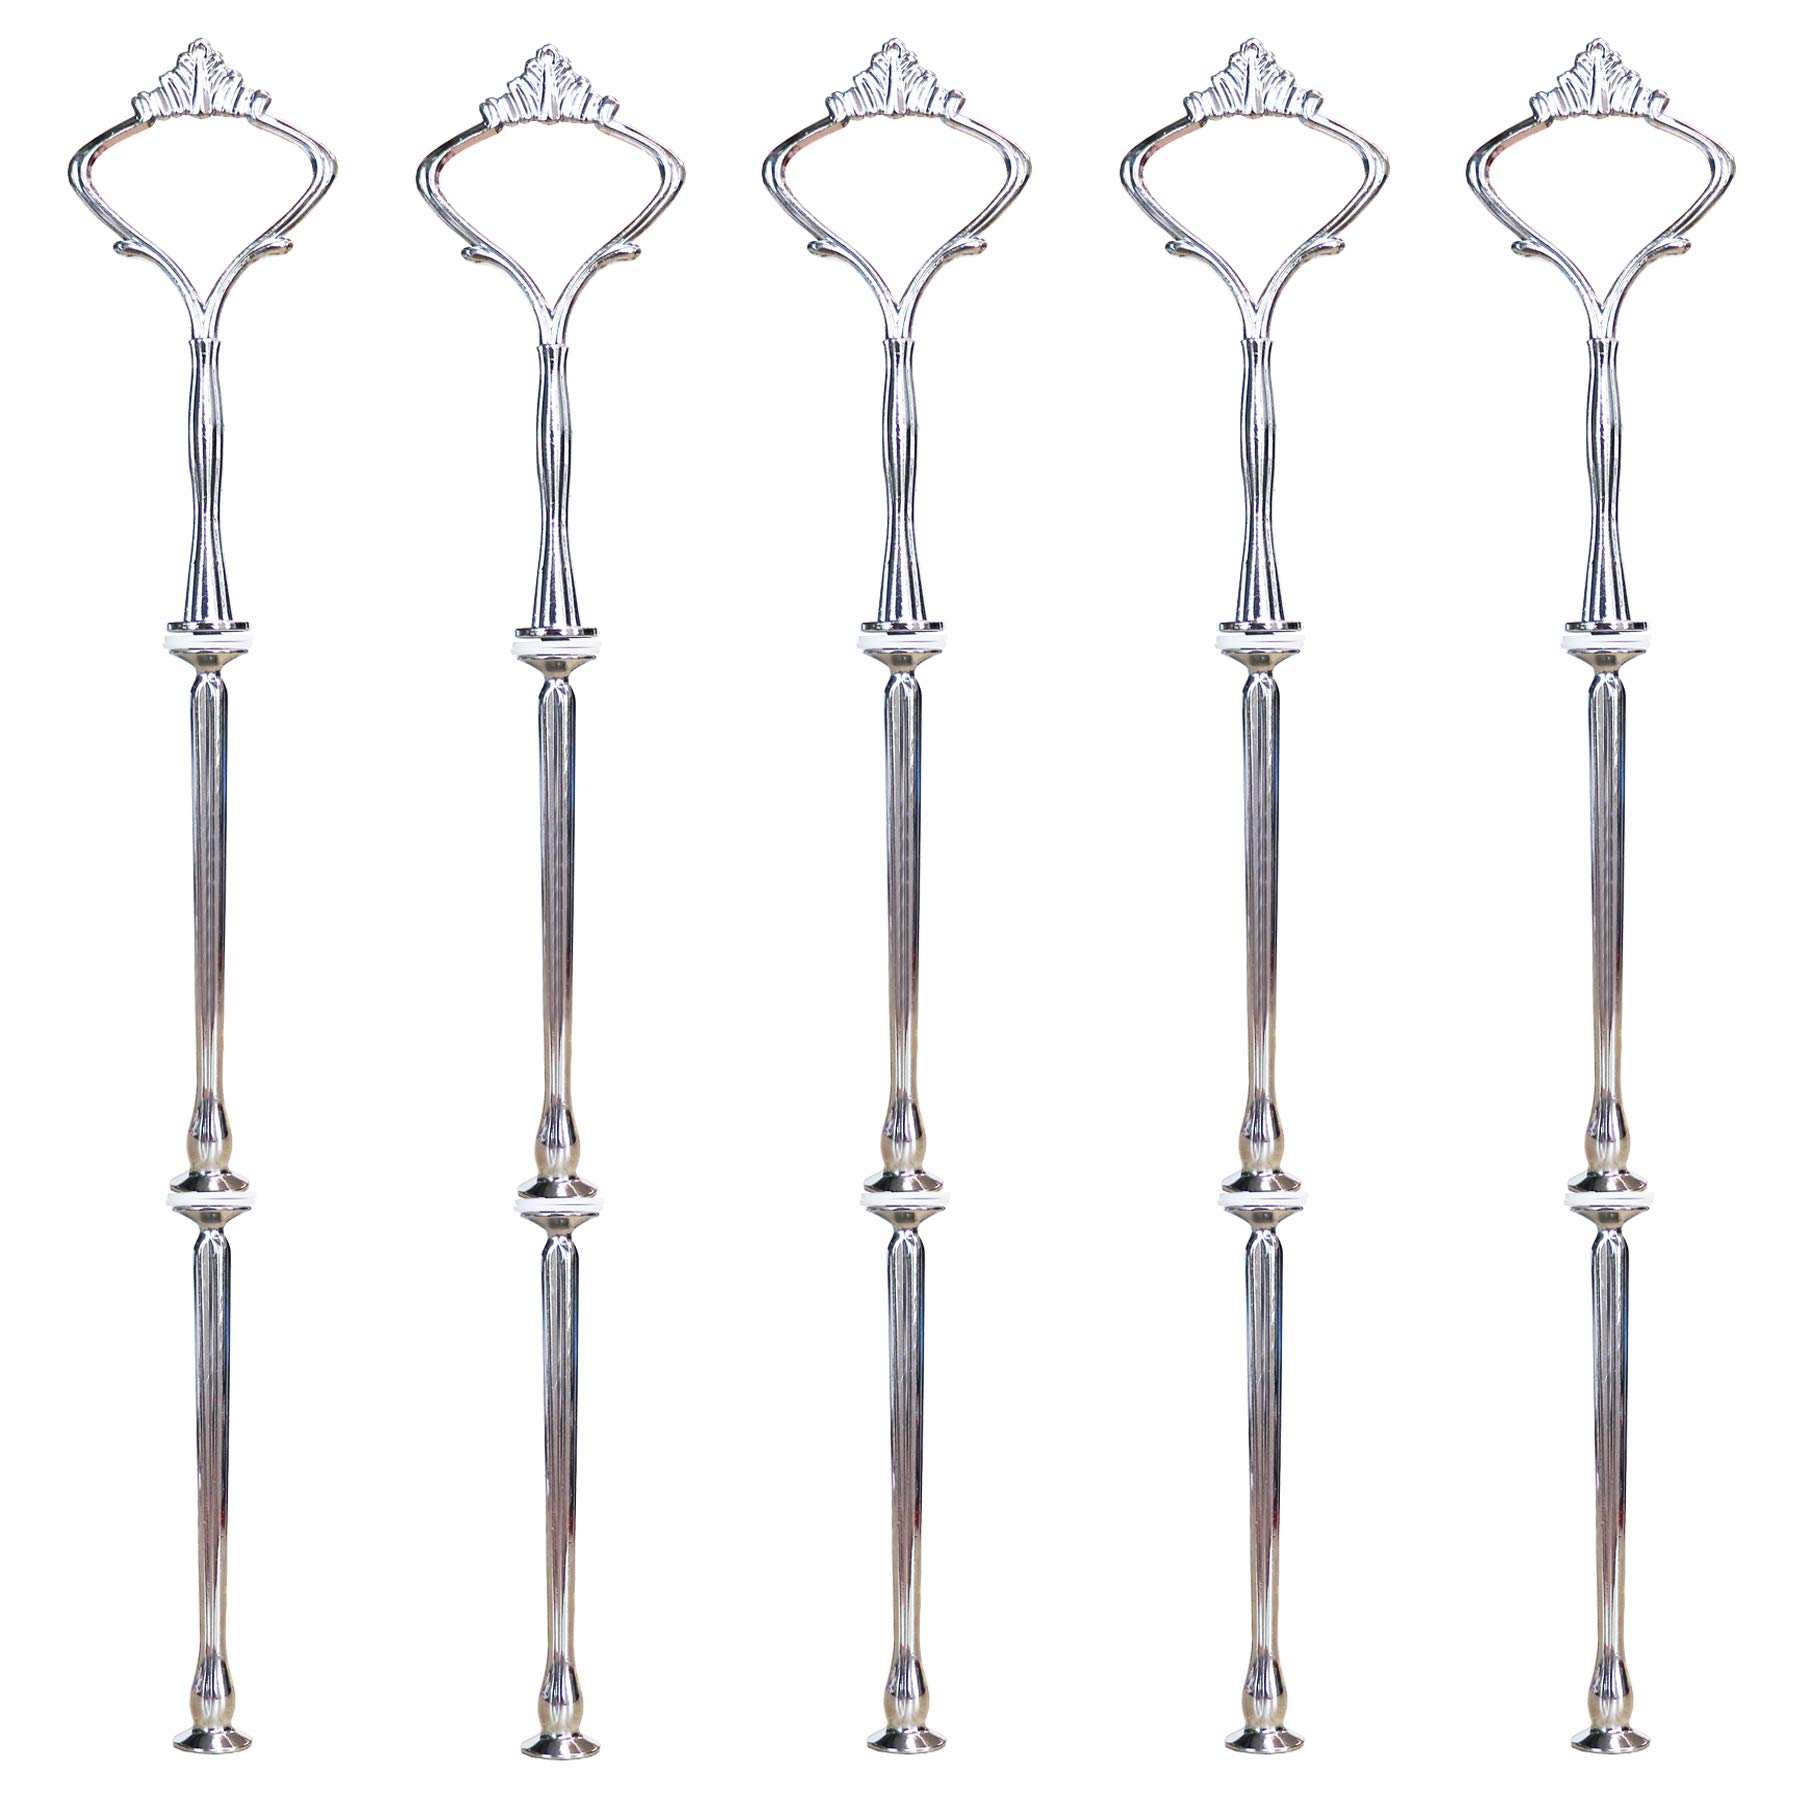 Happy Will 5 Sets 3 Tier Crown Cake Stand Fruit Cake Plate Handle Fitting Hardware Rod Stand Holder with Stylus Silver (Plates Not Include)